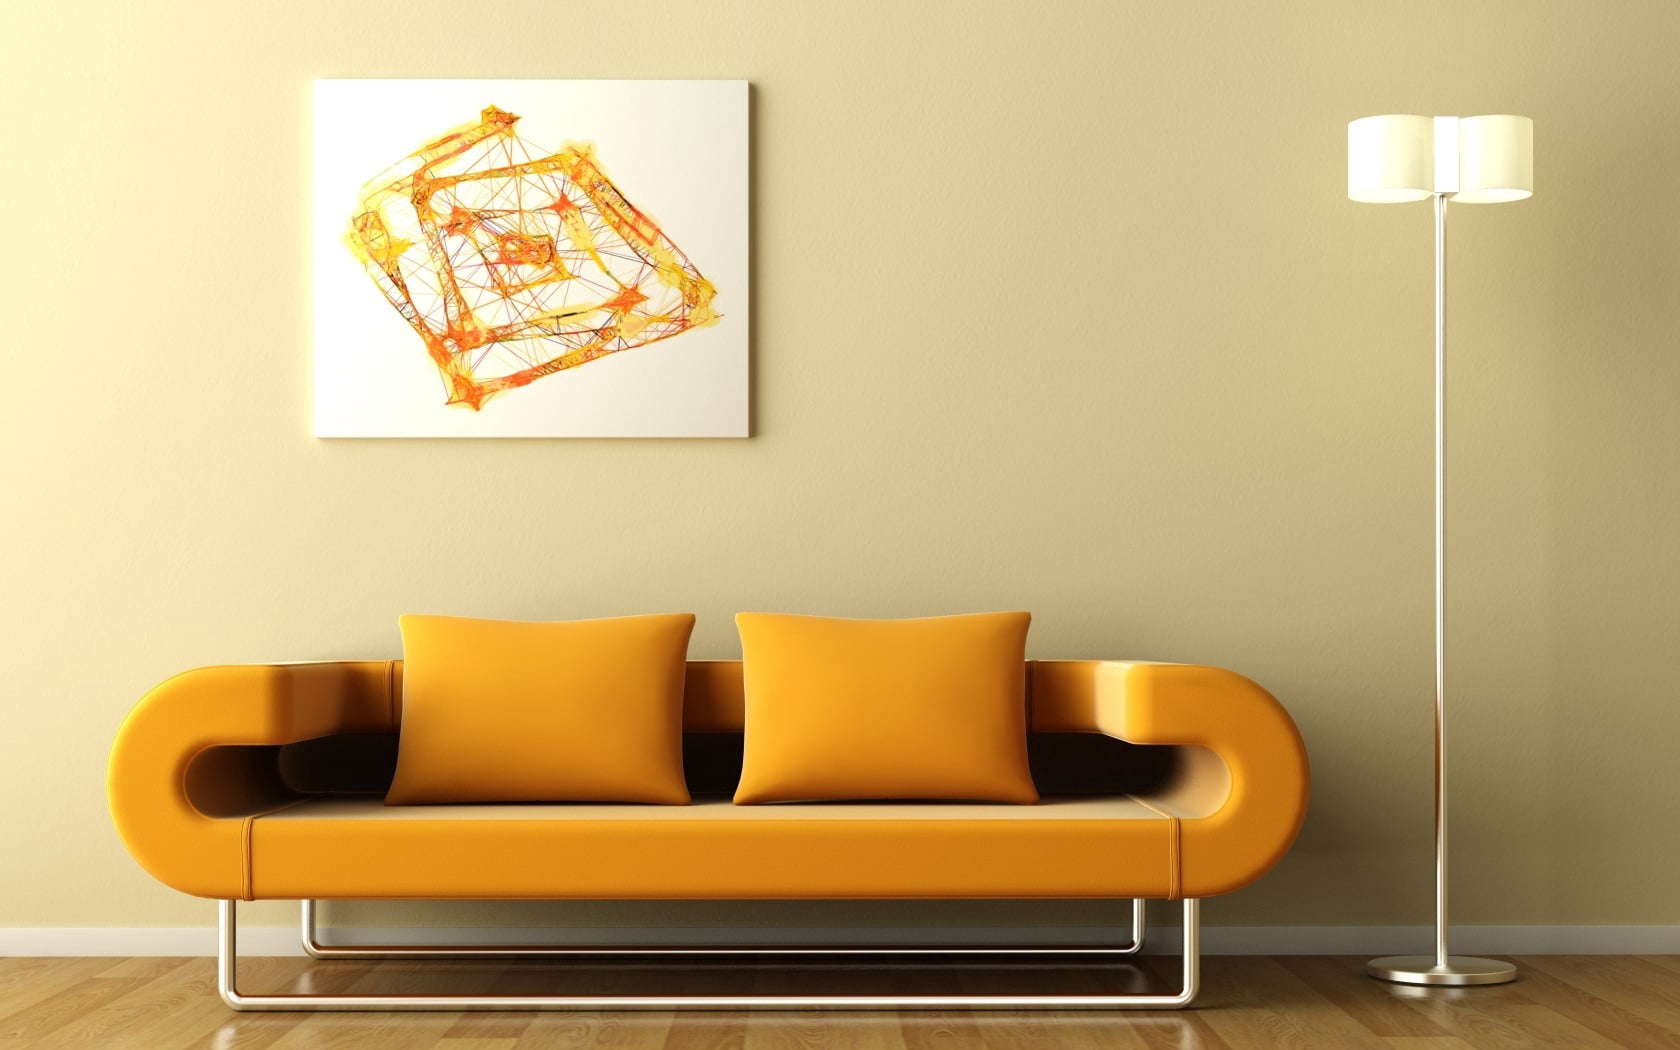 orange padded sofa, paintings, lamps, abstraction, parquet, furniture